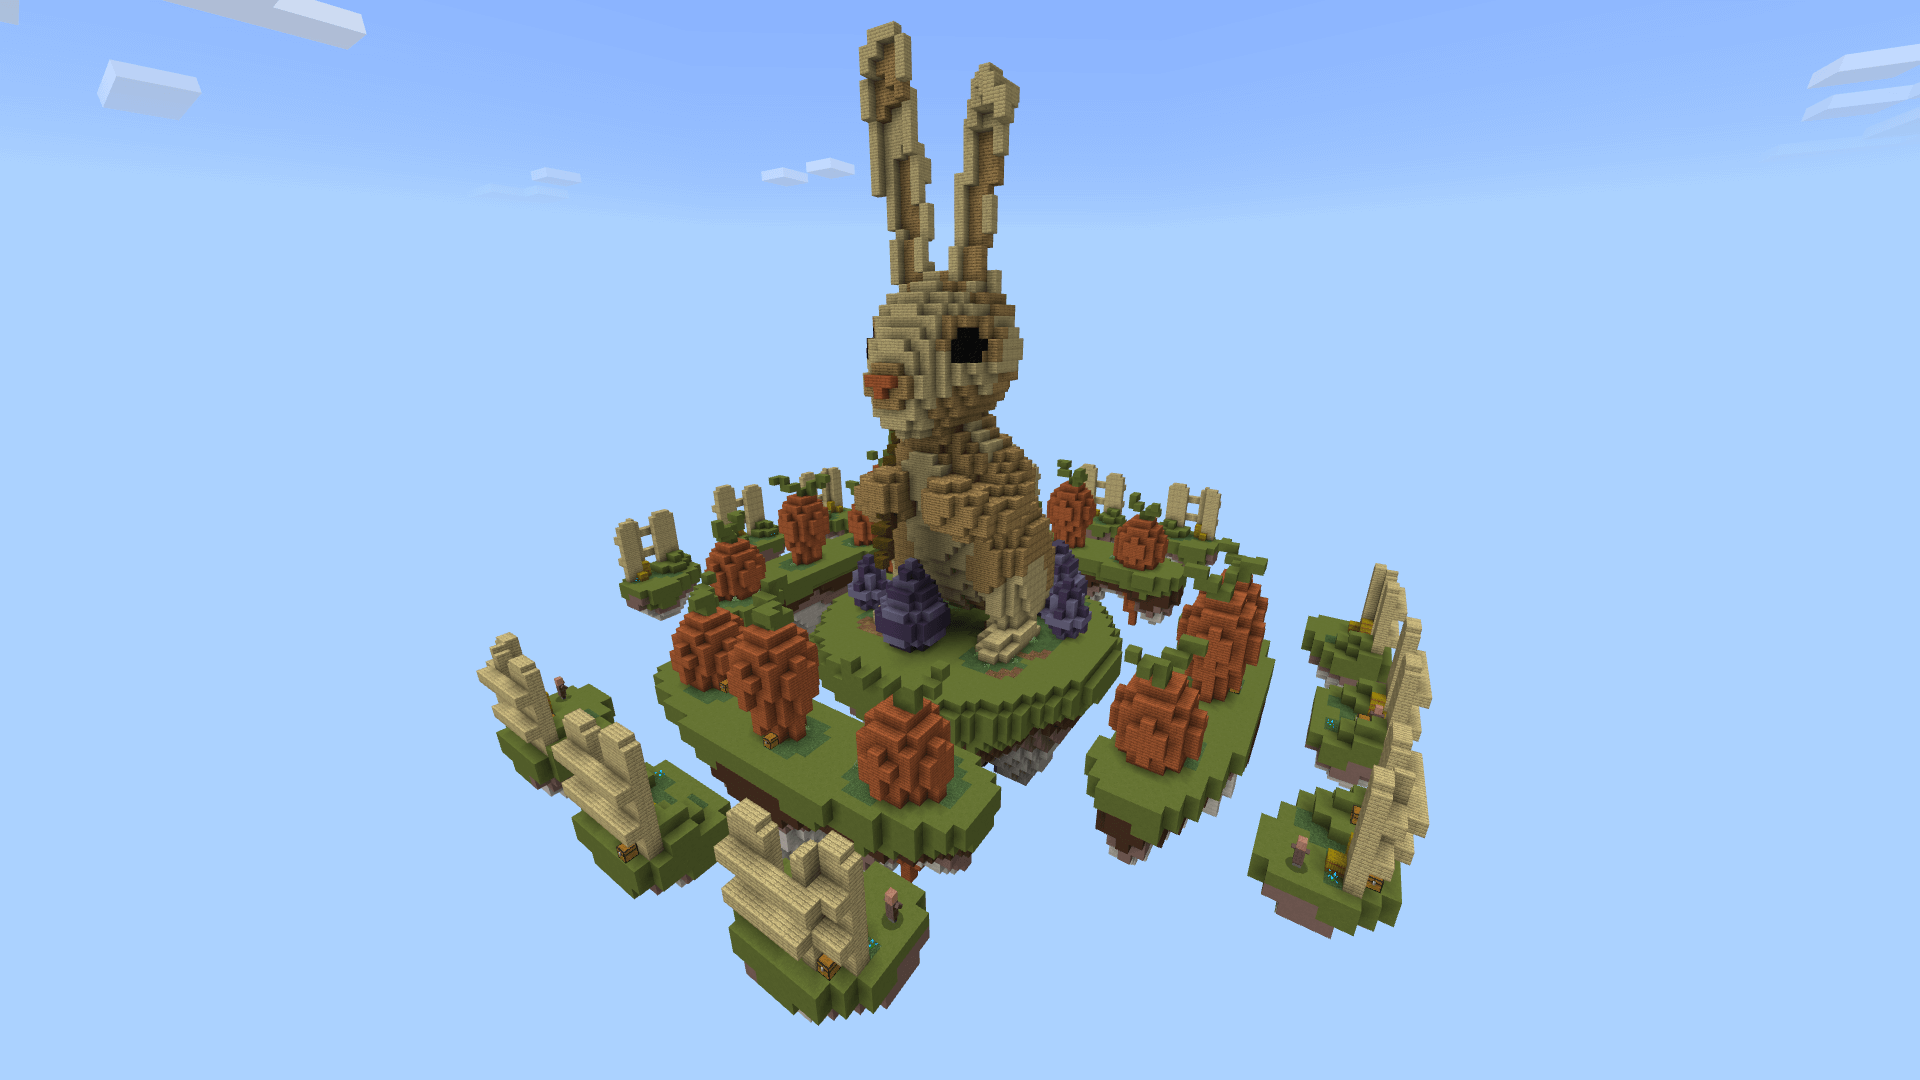 Bunny - Solo SkyWars.png